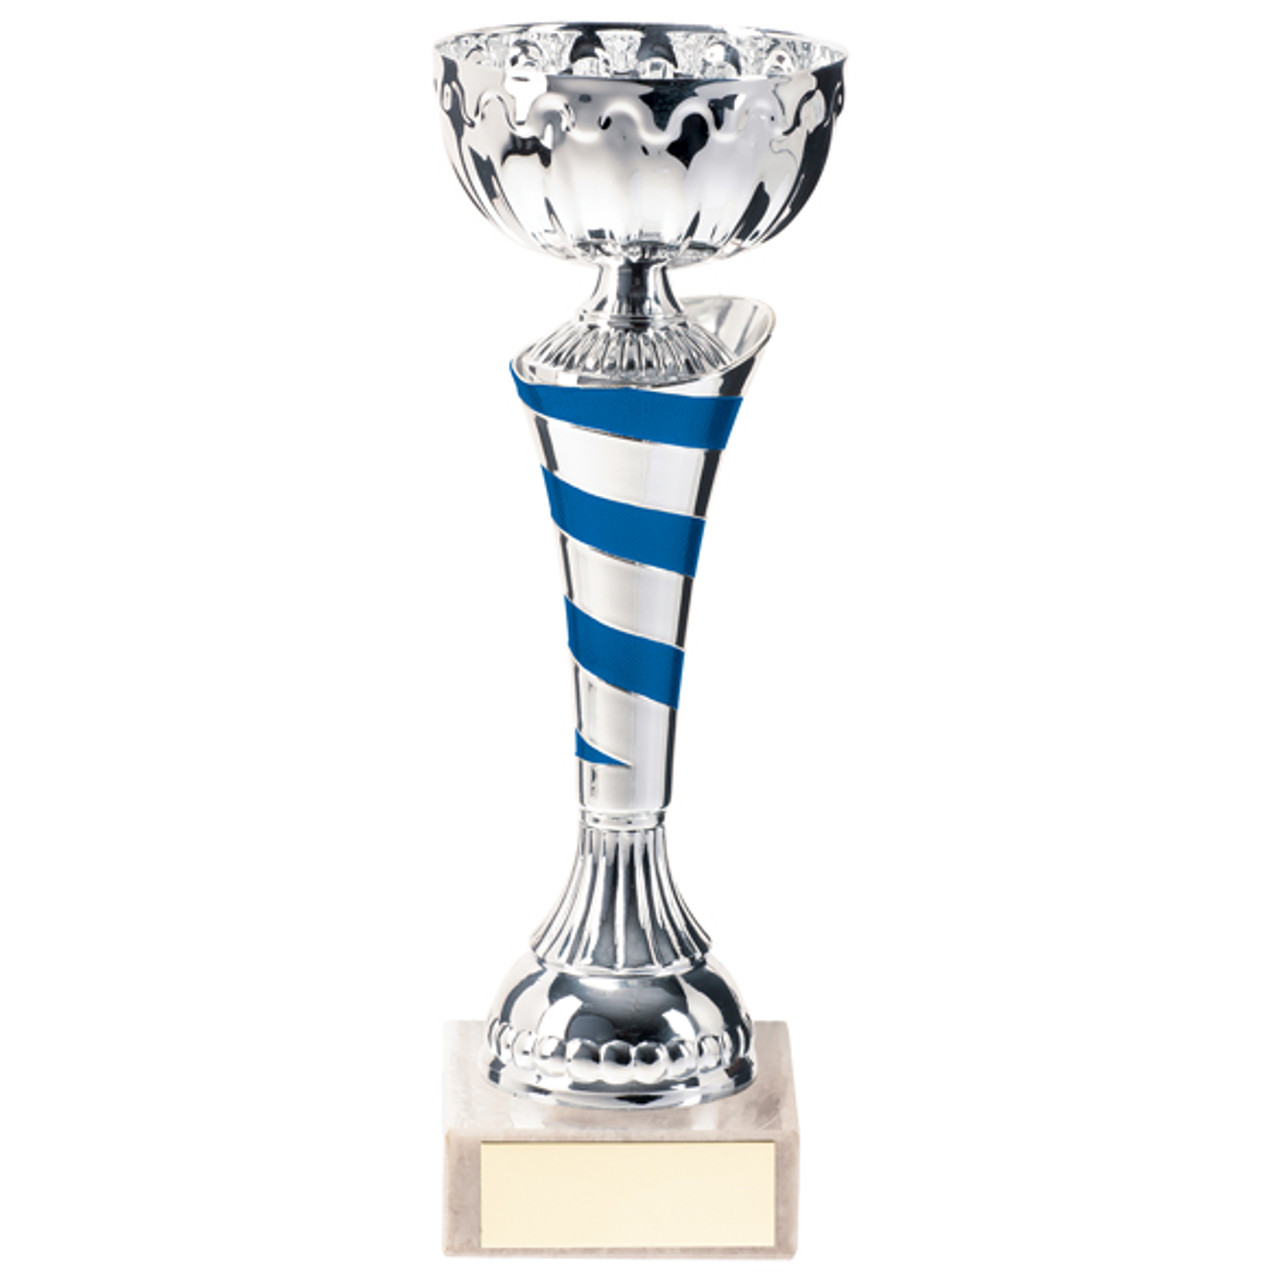 ETERNITY Silver & Blue Cup Trophy Series